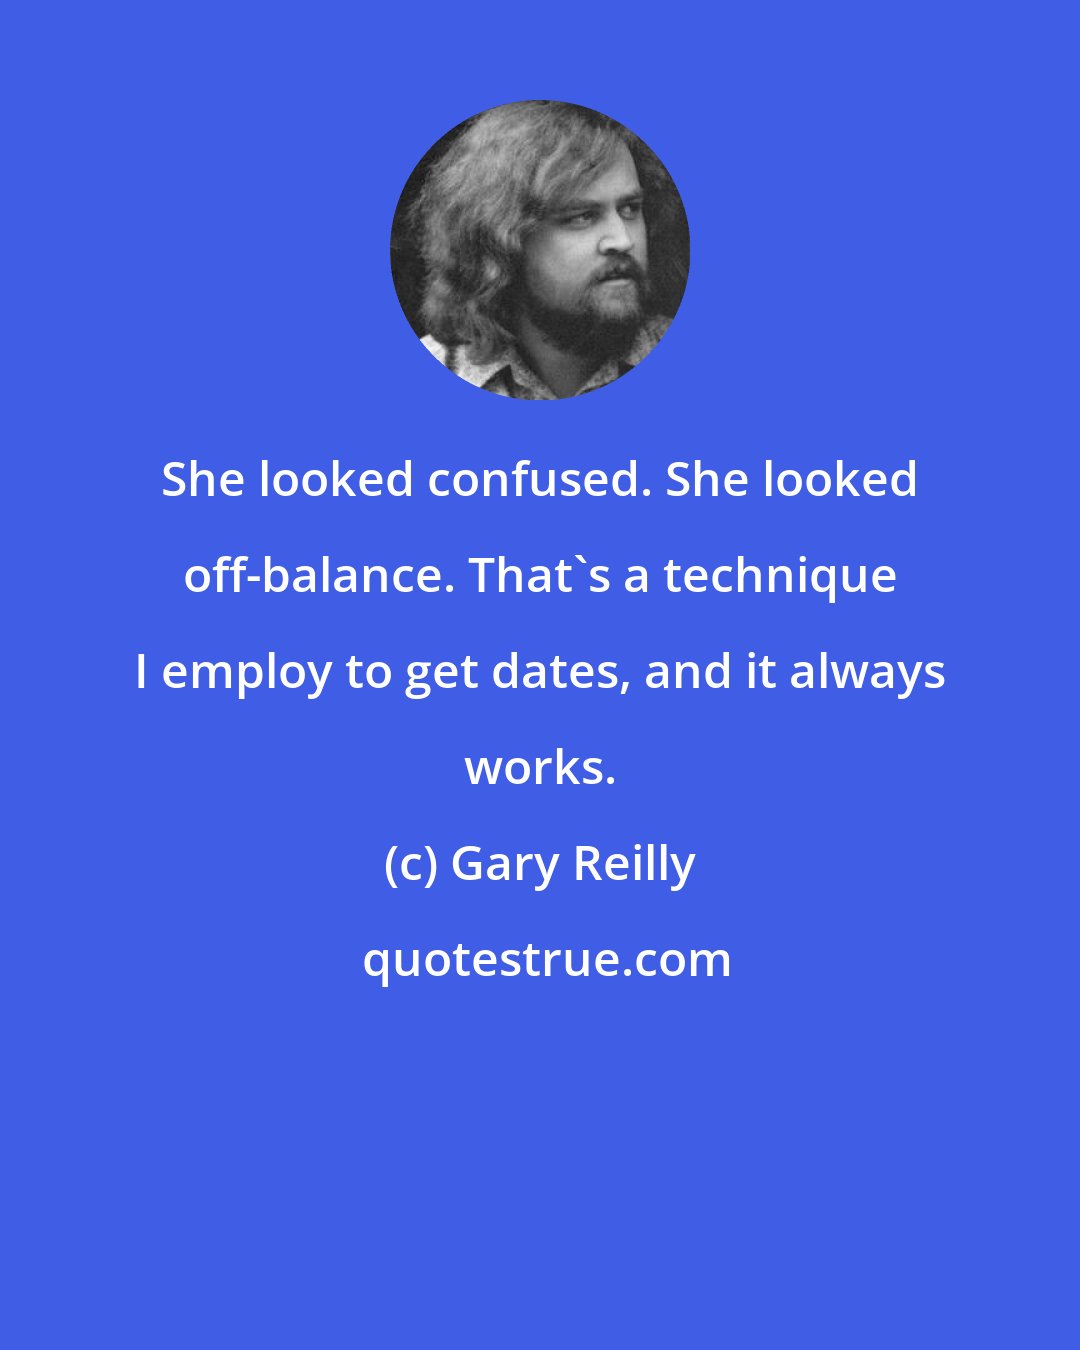 Gary Reilly: She looked confused. She looked off-balance. That's a technique I employ to get dates, and it always works.